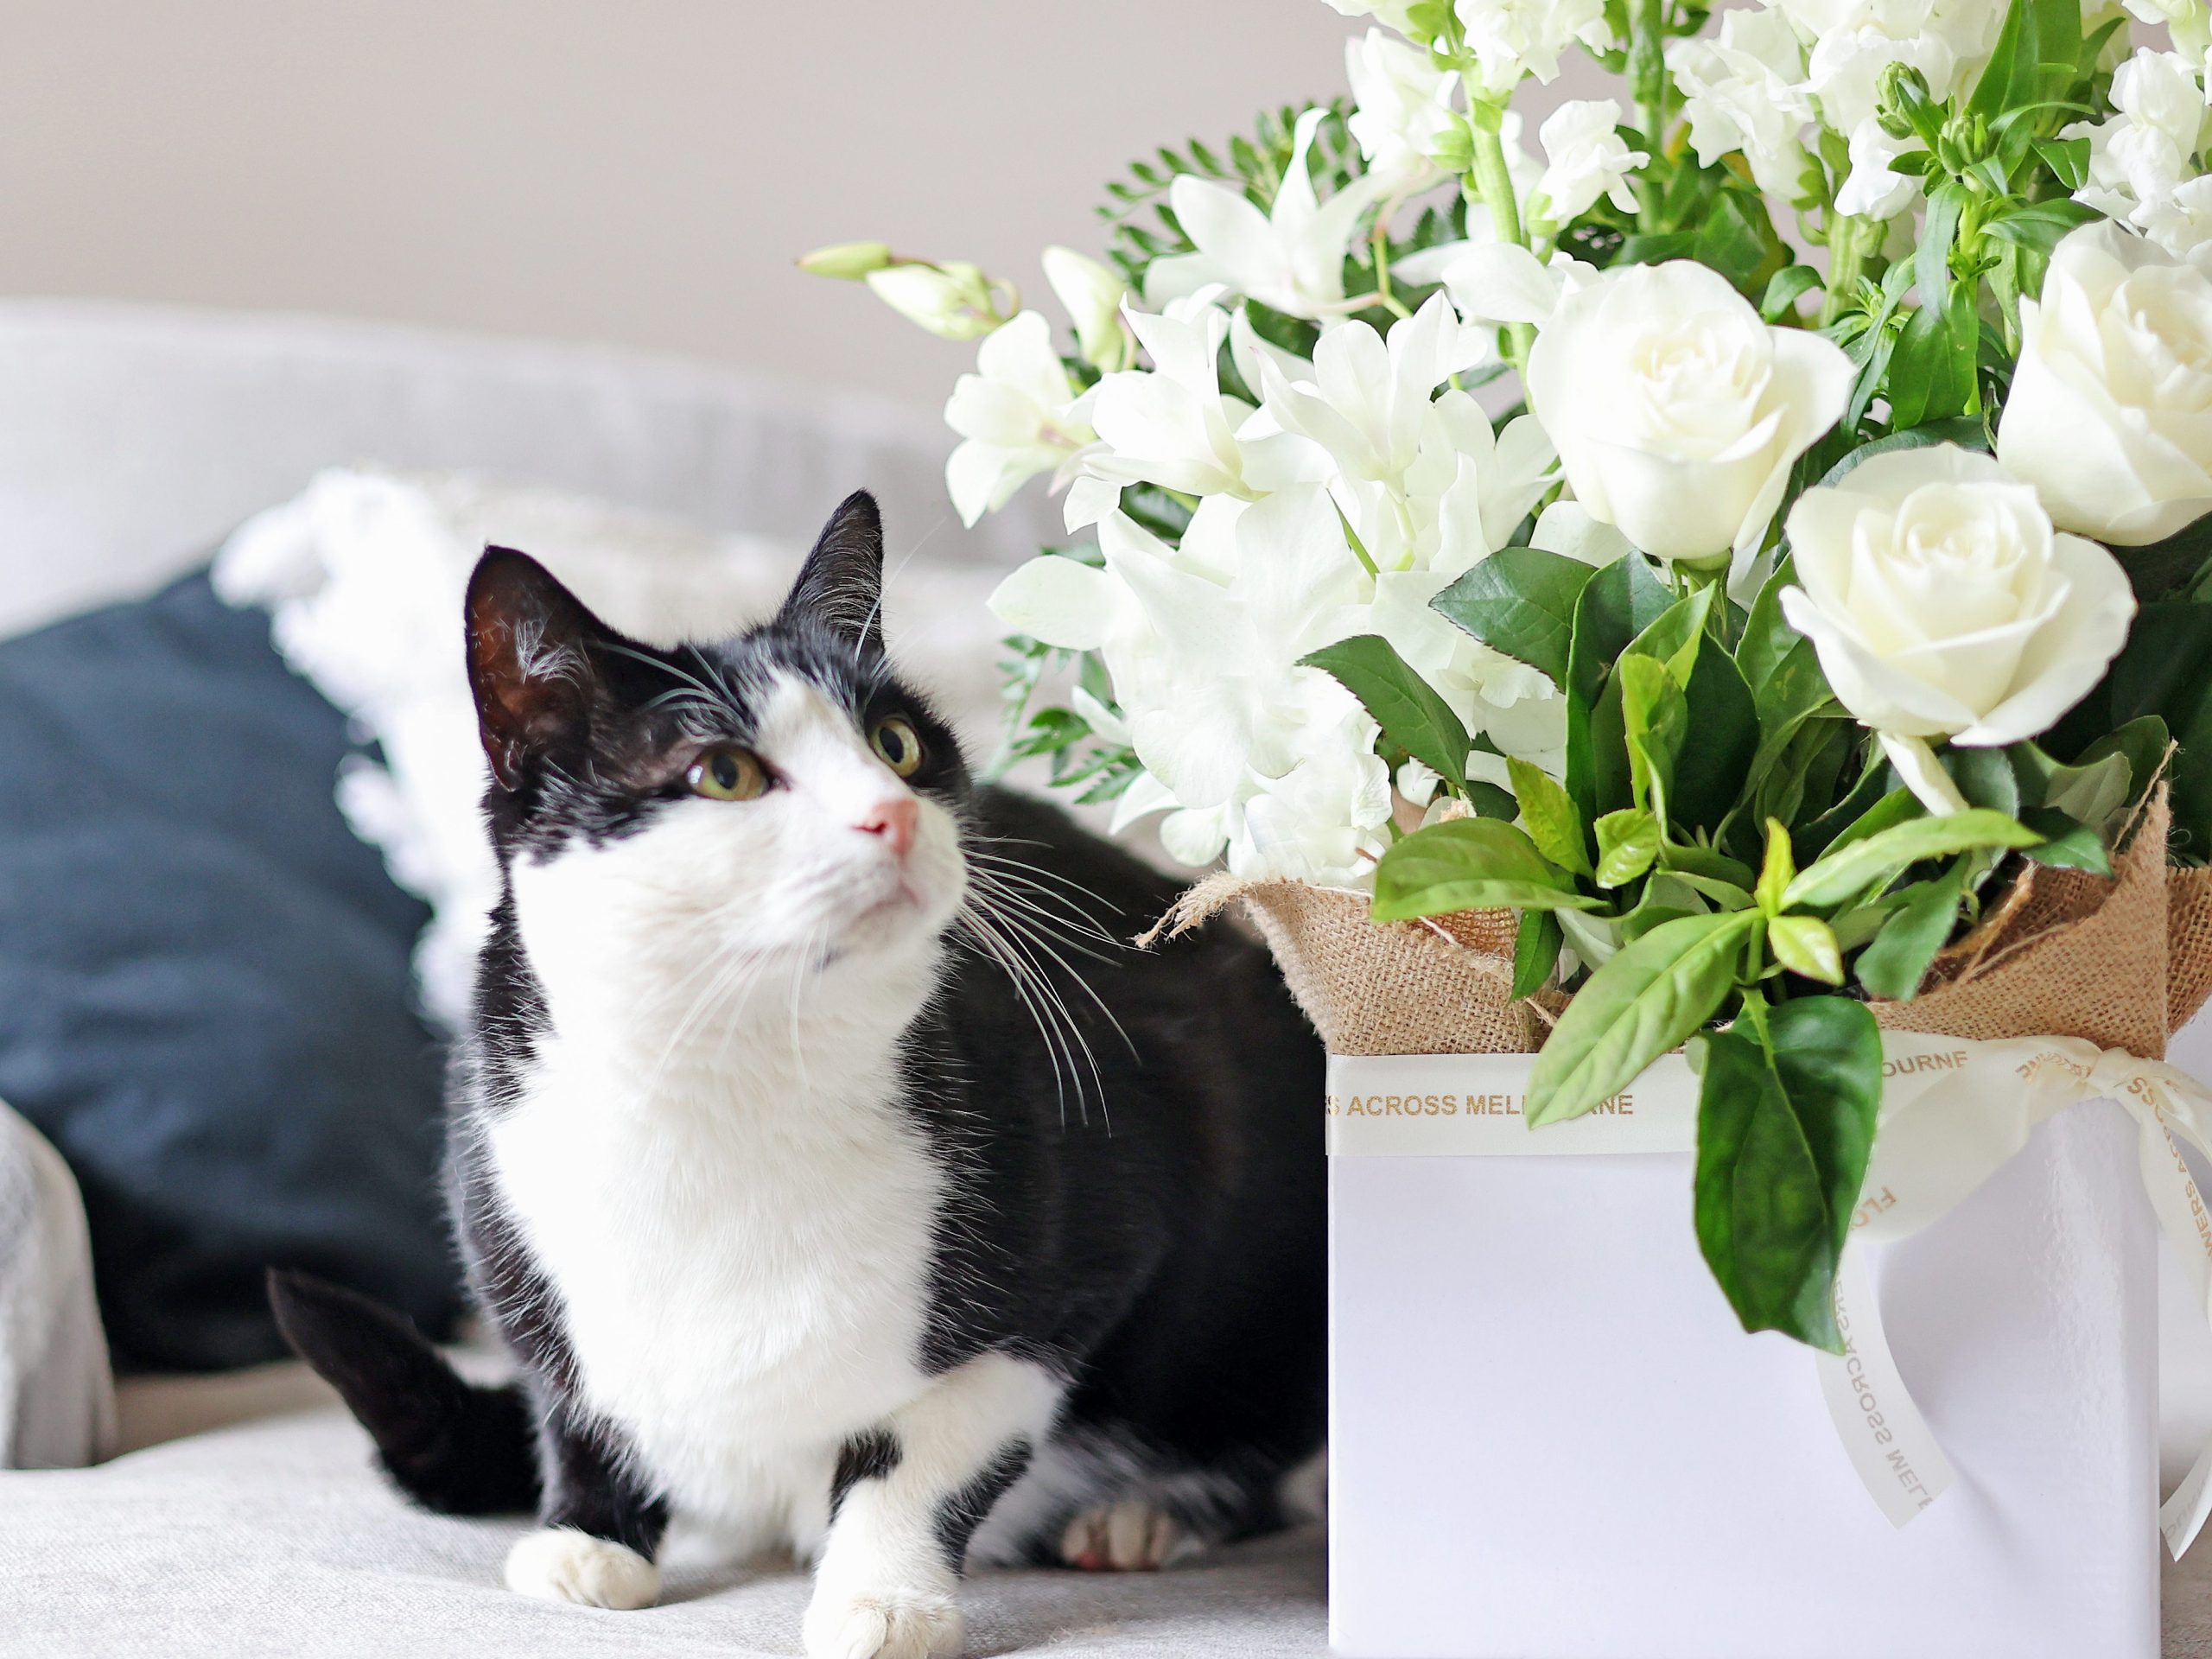 Cat likes bunch of flowers including roses